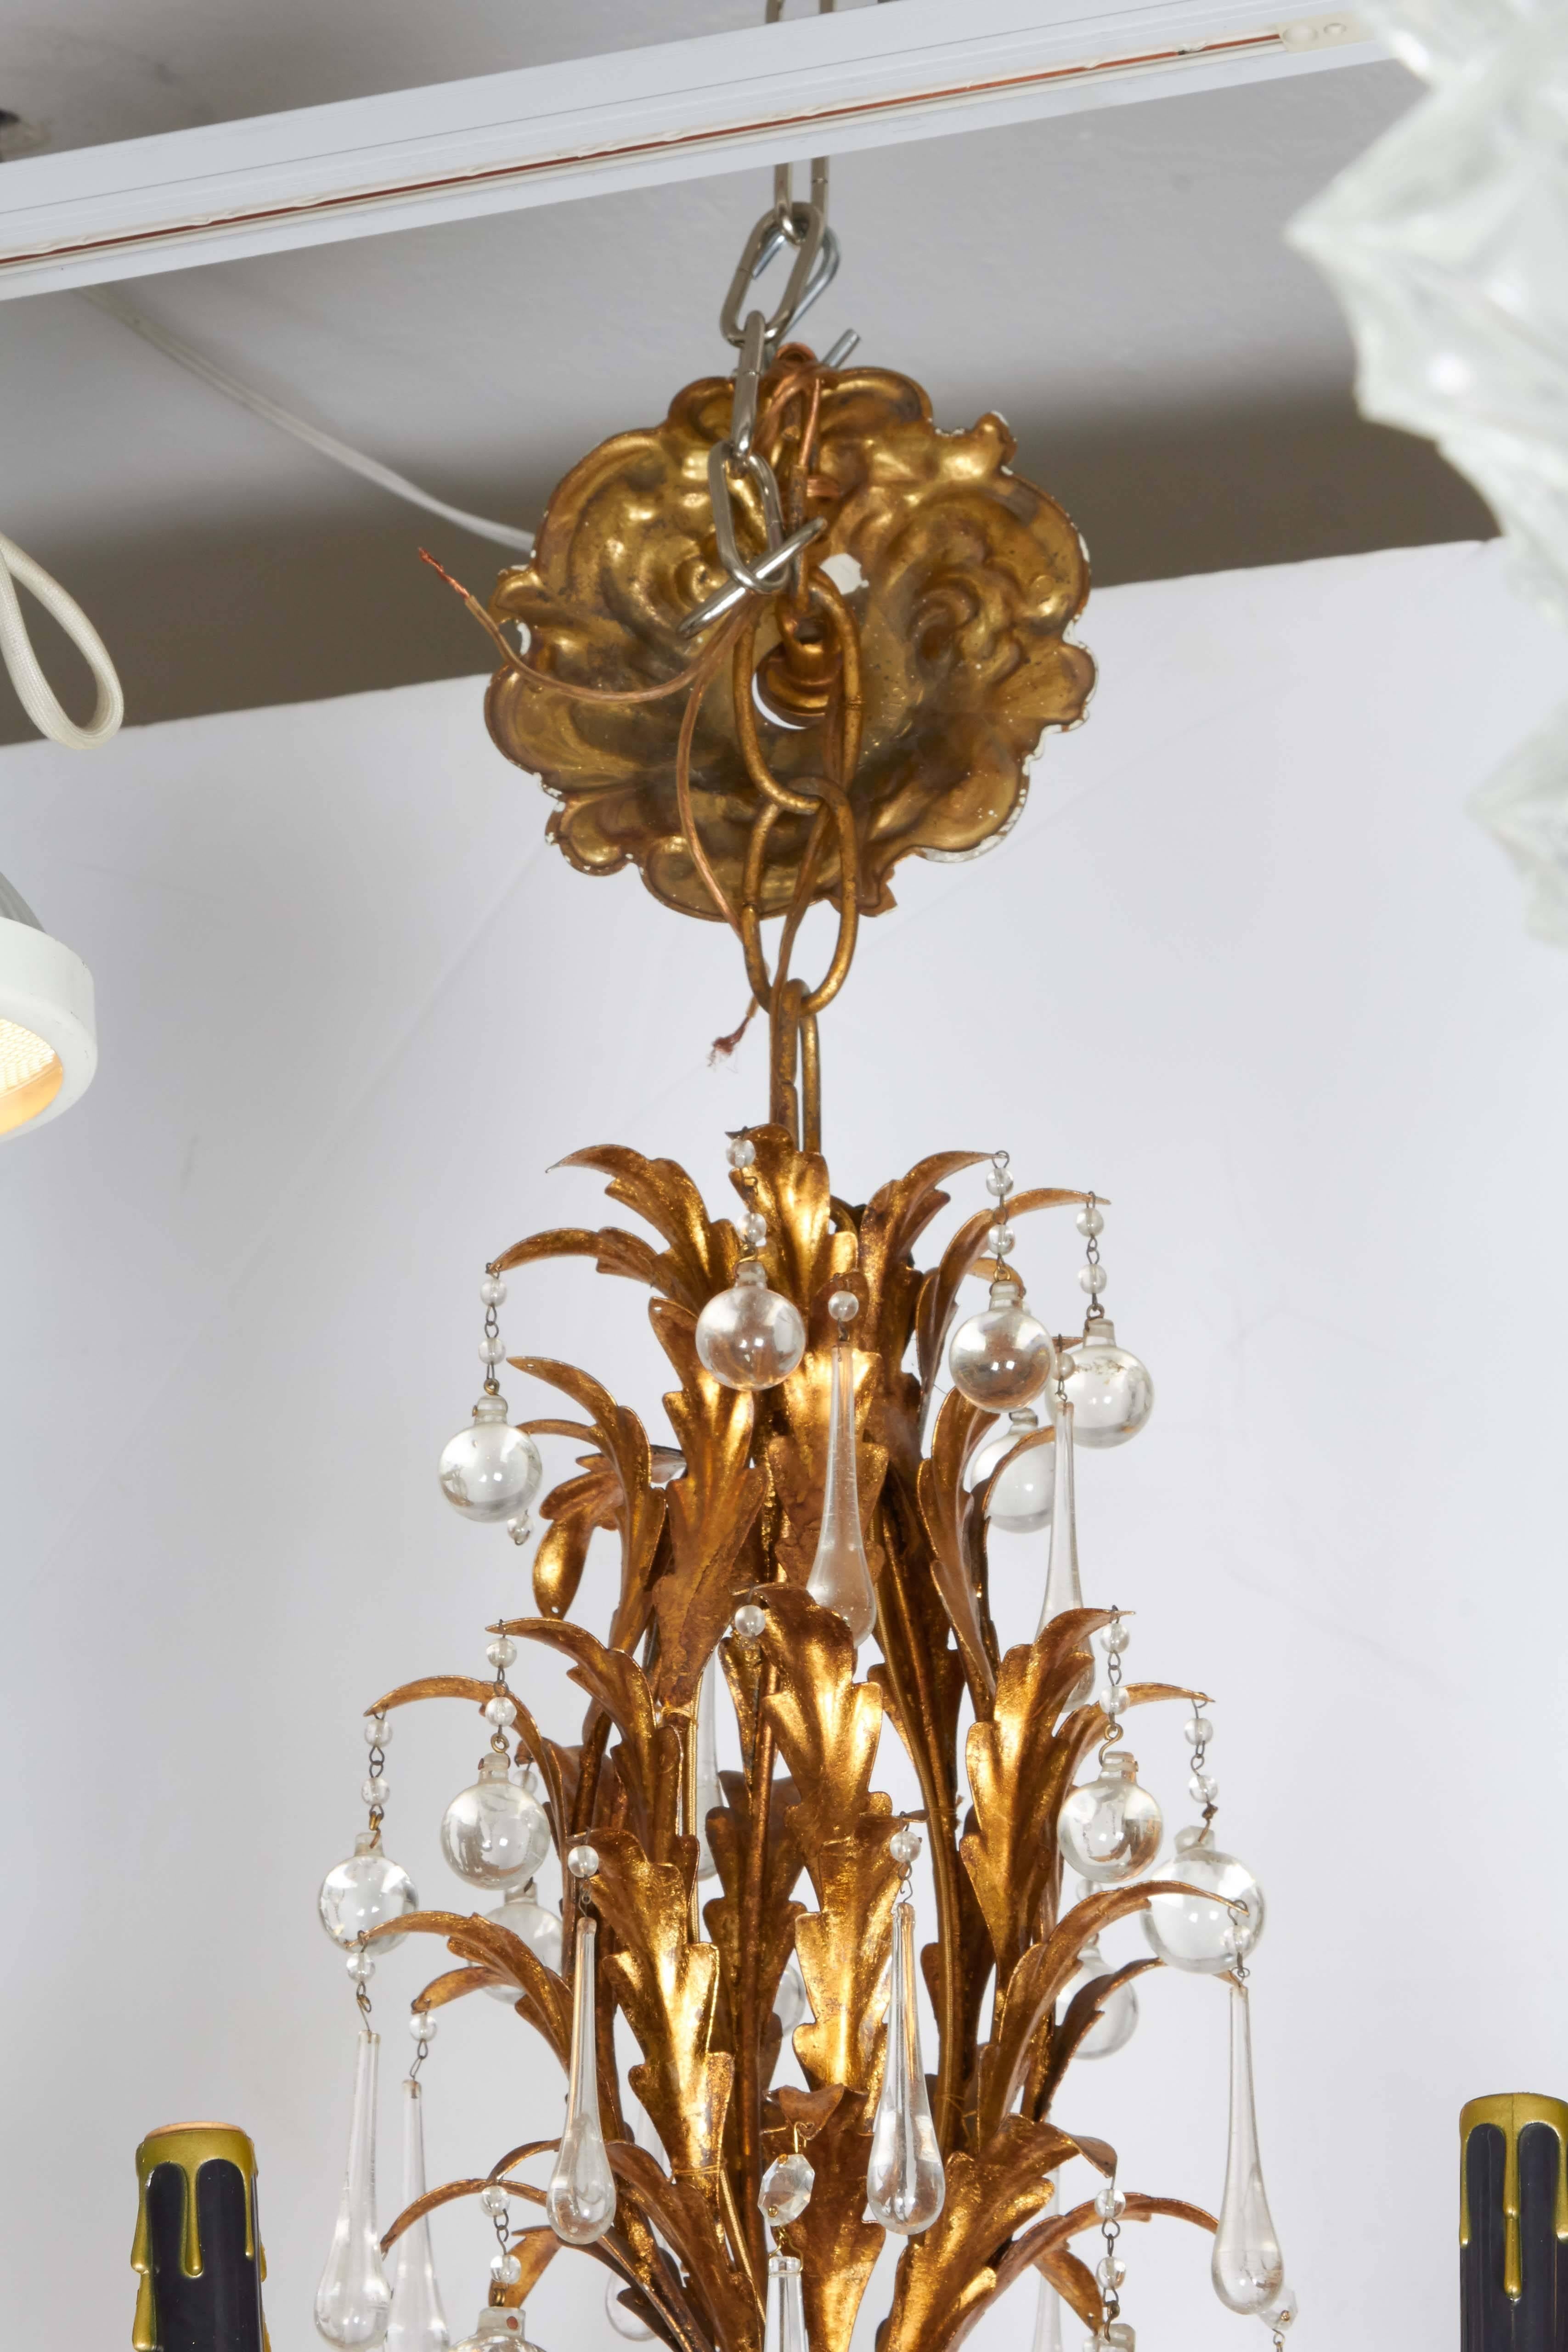 A luxurious tole chandelier in the Hollywood Regency style, with eight arms, each with black faux candle socket covers, on frame comprised of gilded metal foliage, trimmed with crystal drops. This light fixture remains in very good vintage